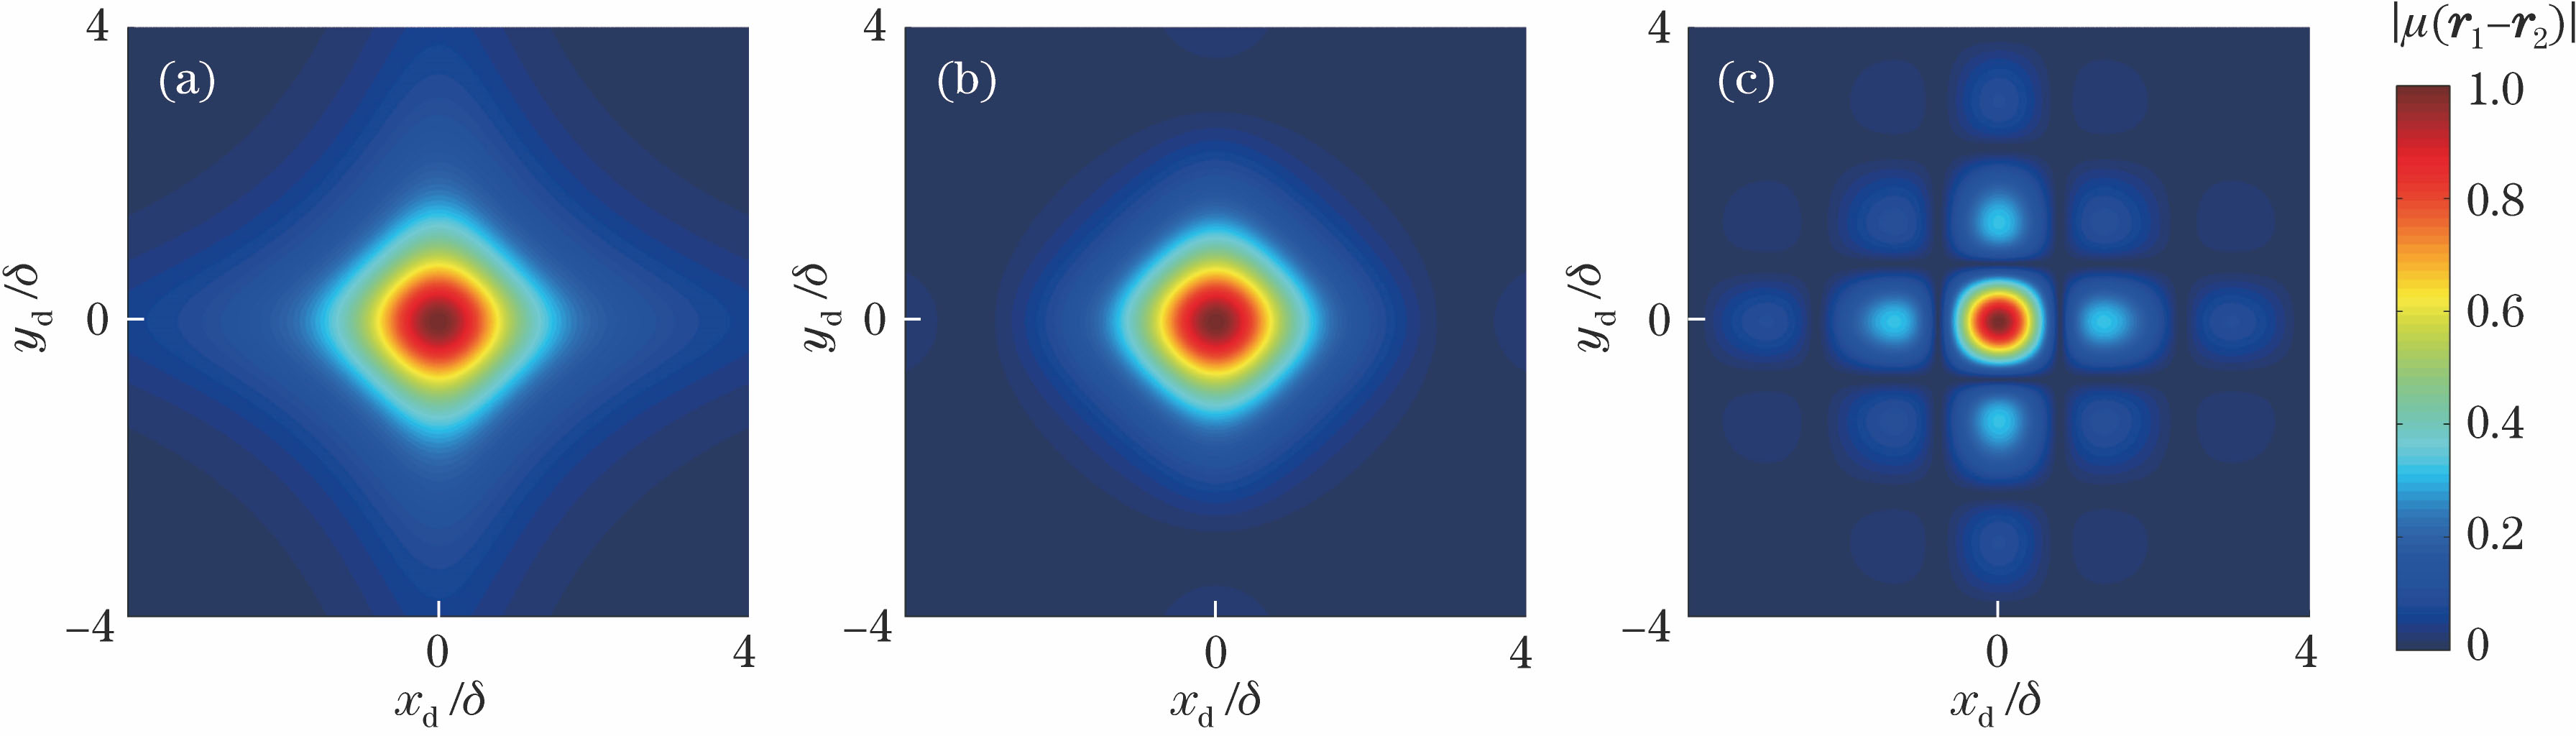 Distributions of μ(r1-r2) of cLSM beam in source plane for different values of βx(βy). (a) βx=βy=0; (b) βx=βy=0.5; (c) βx=βy=2.0